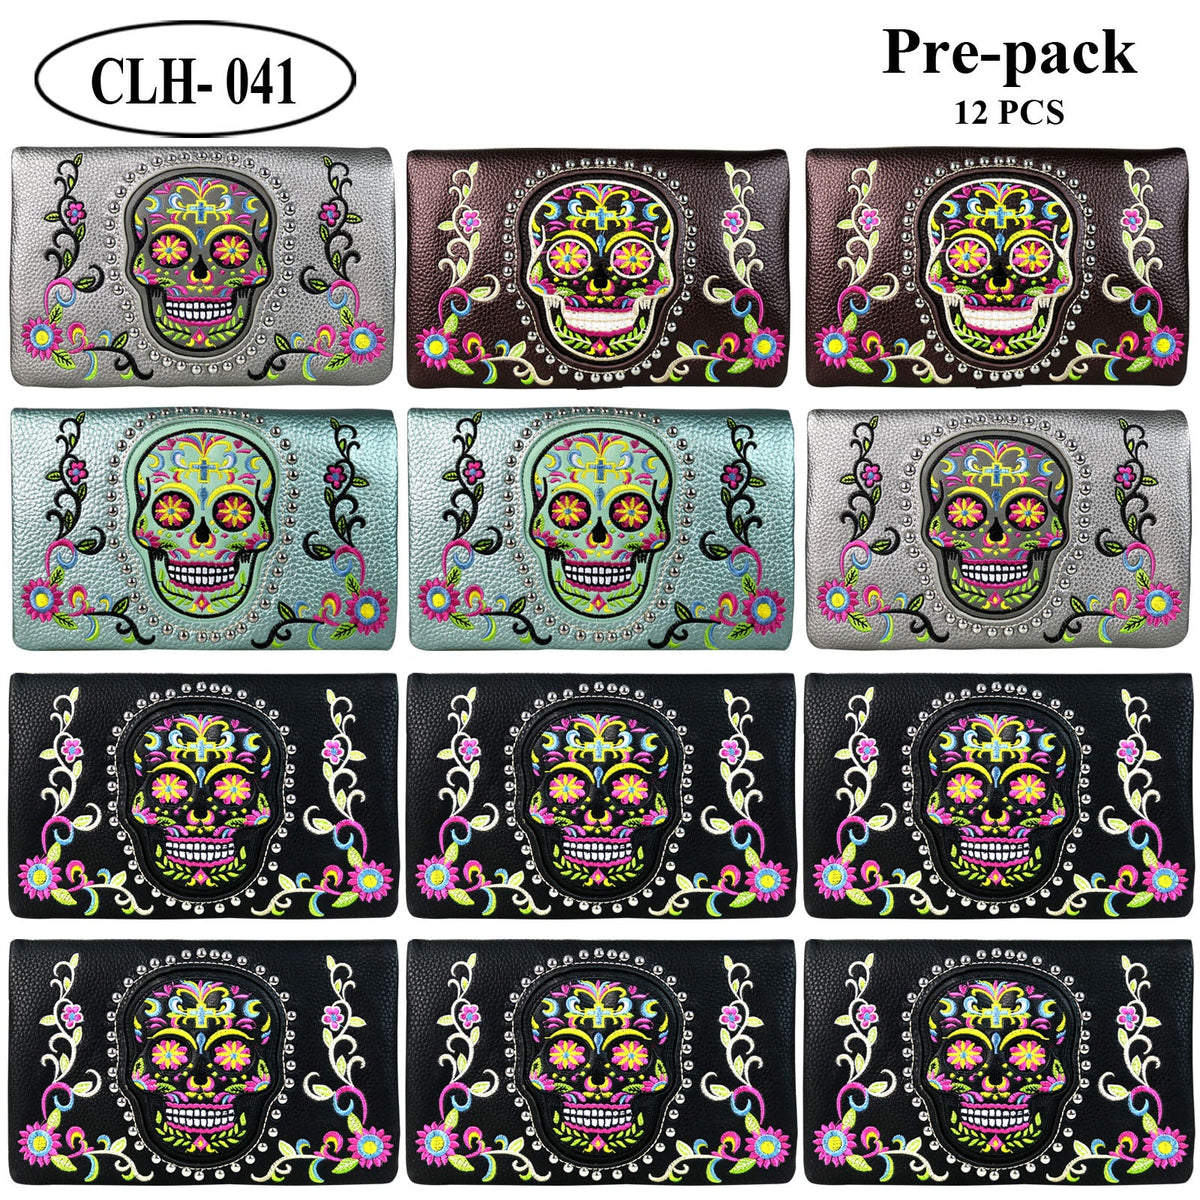 American Bling Sugar Skull Clutch Pre-Pack Assorted Color (12PCS) - Cowgirl Wear